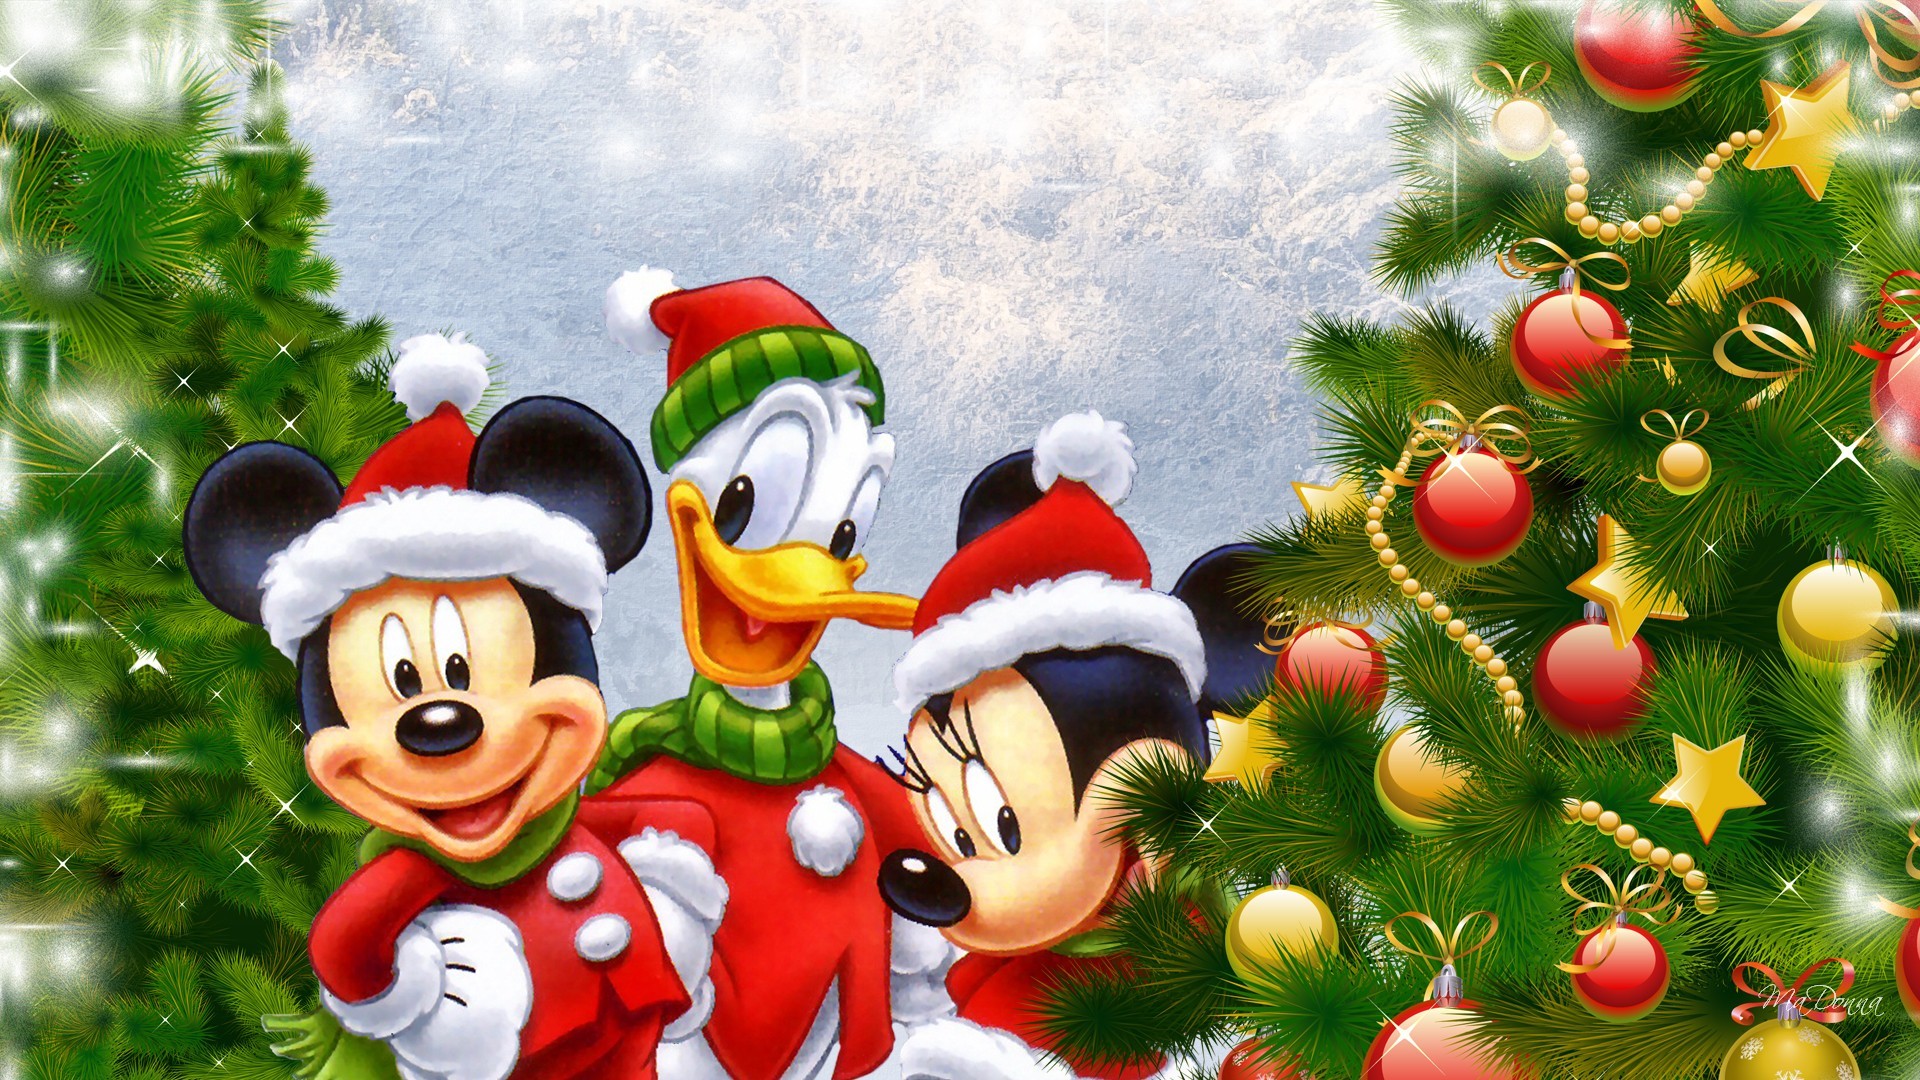 1920x1080 ... disney donald duck mickey and minnie mouse christmas tree desktop;  mickey minnie wallpapers ...